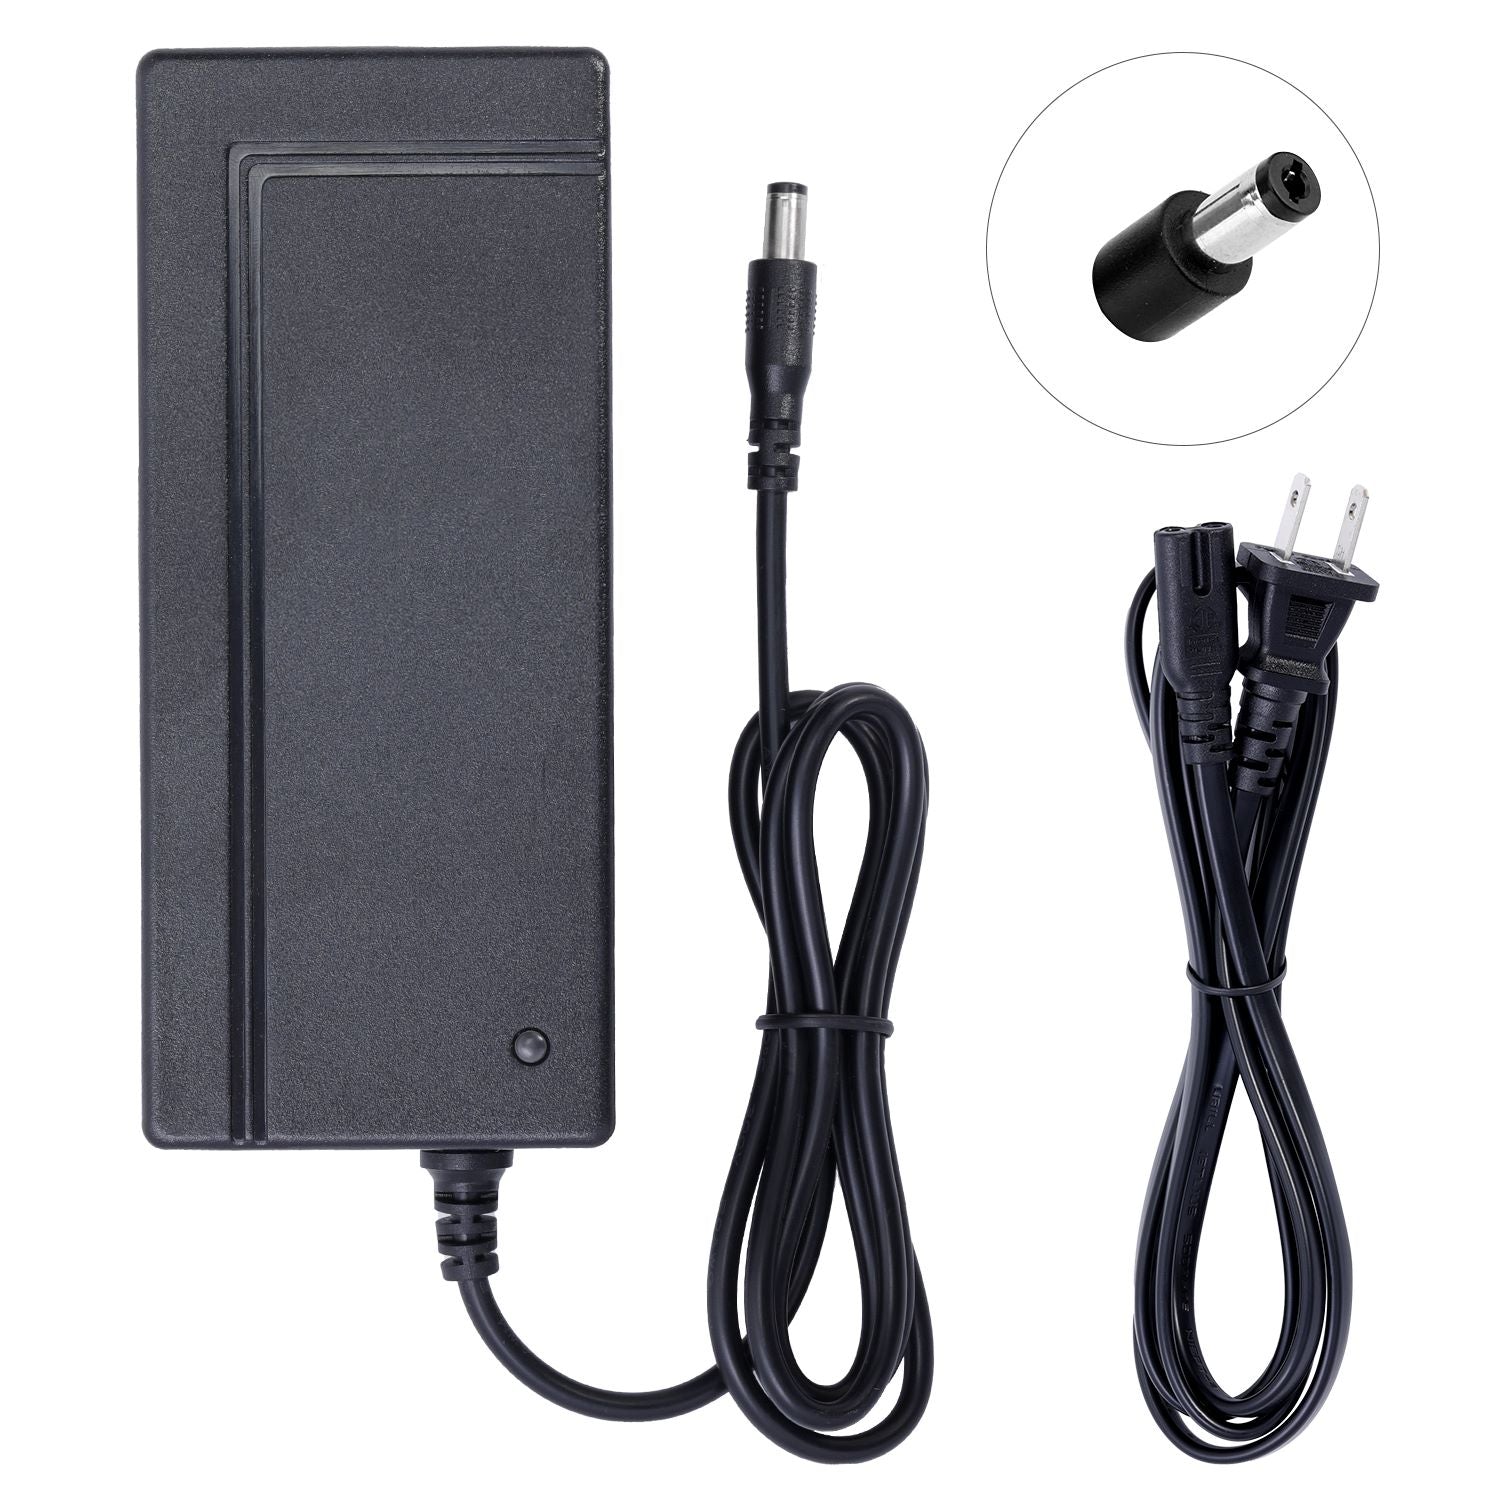 UL Listed Charger for Swagtron EB5 Pro eBike